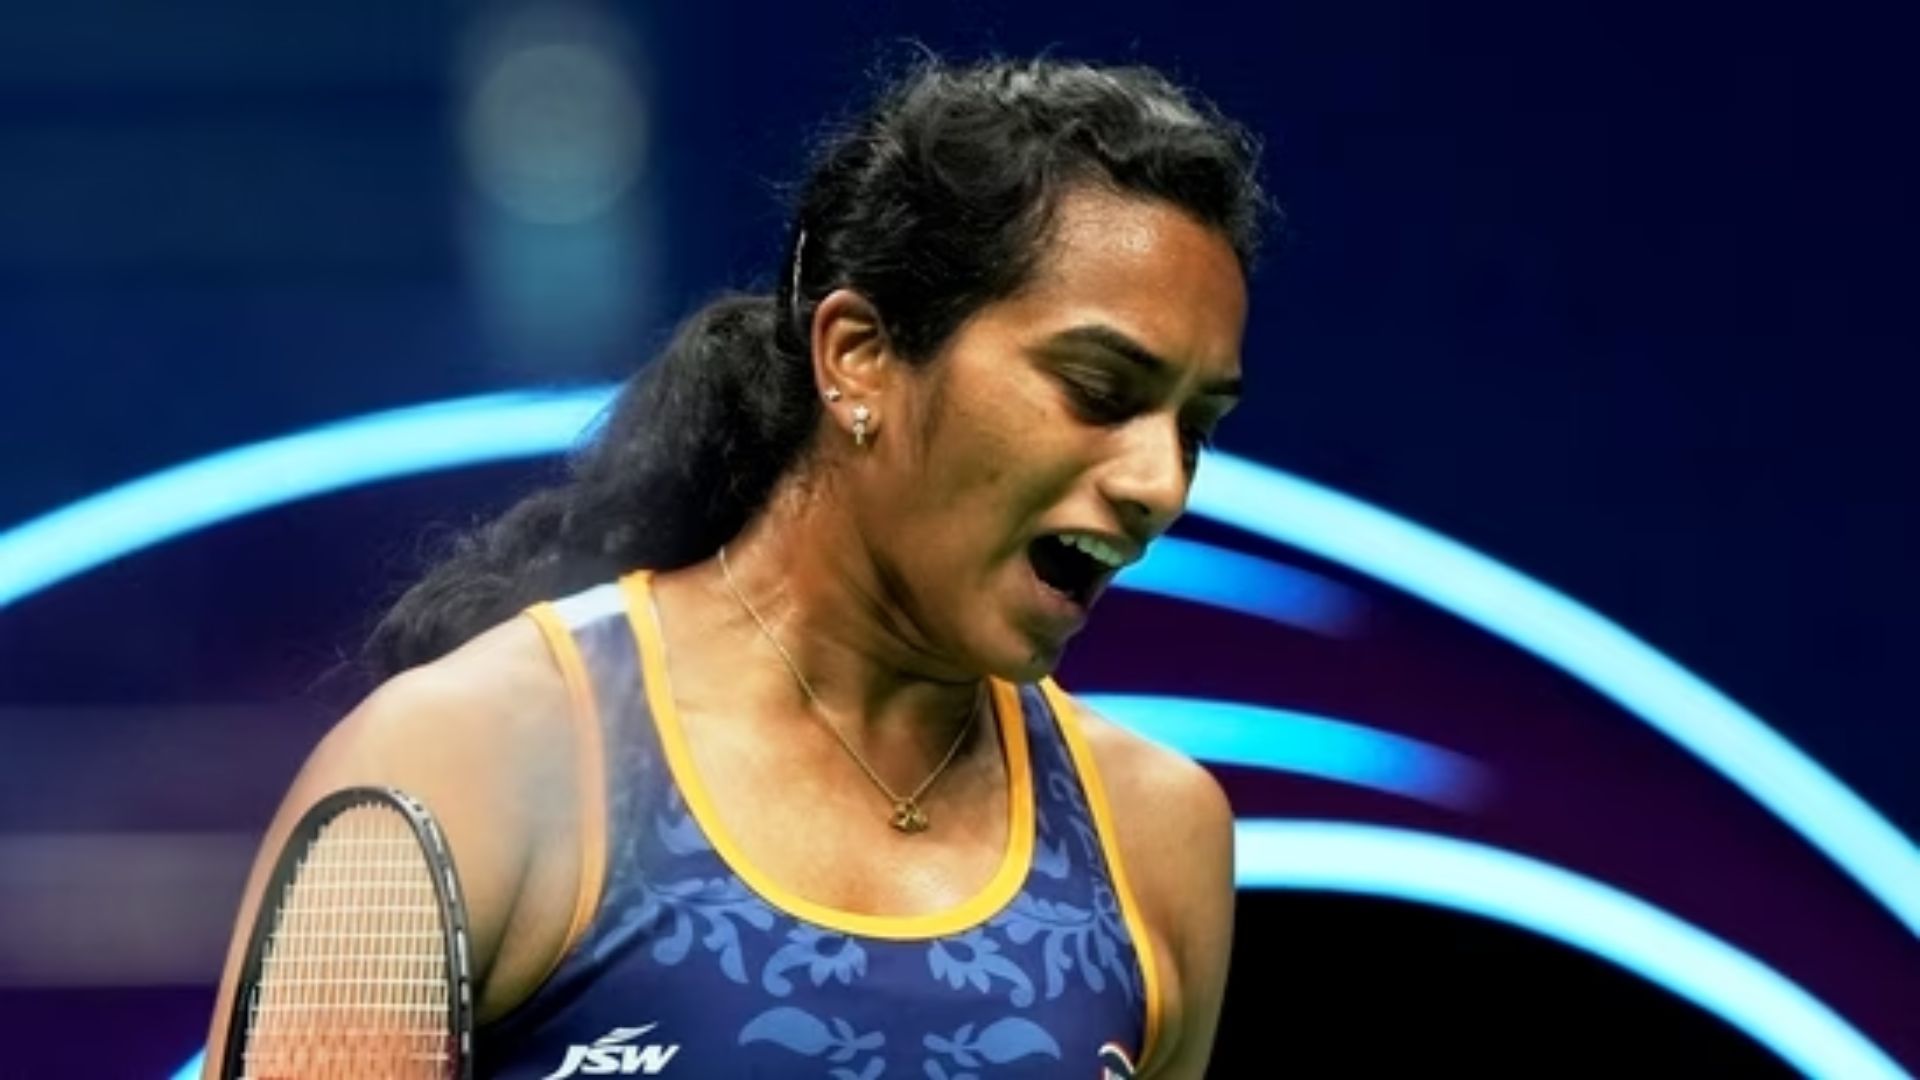 Will the Padukone switch lift Sindhu's fortunes